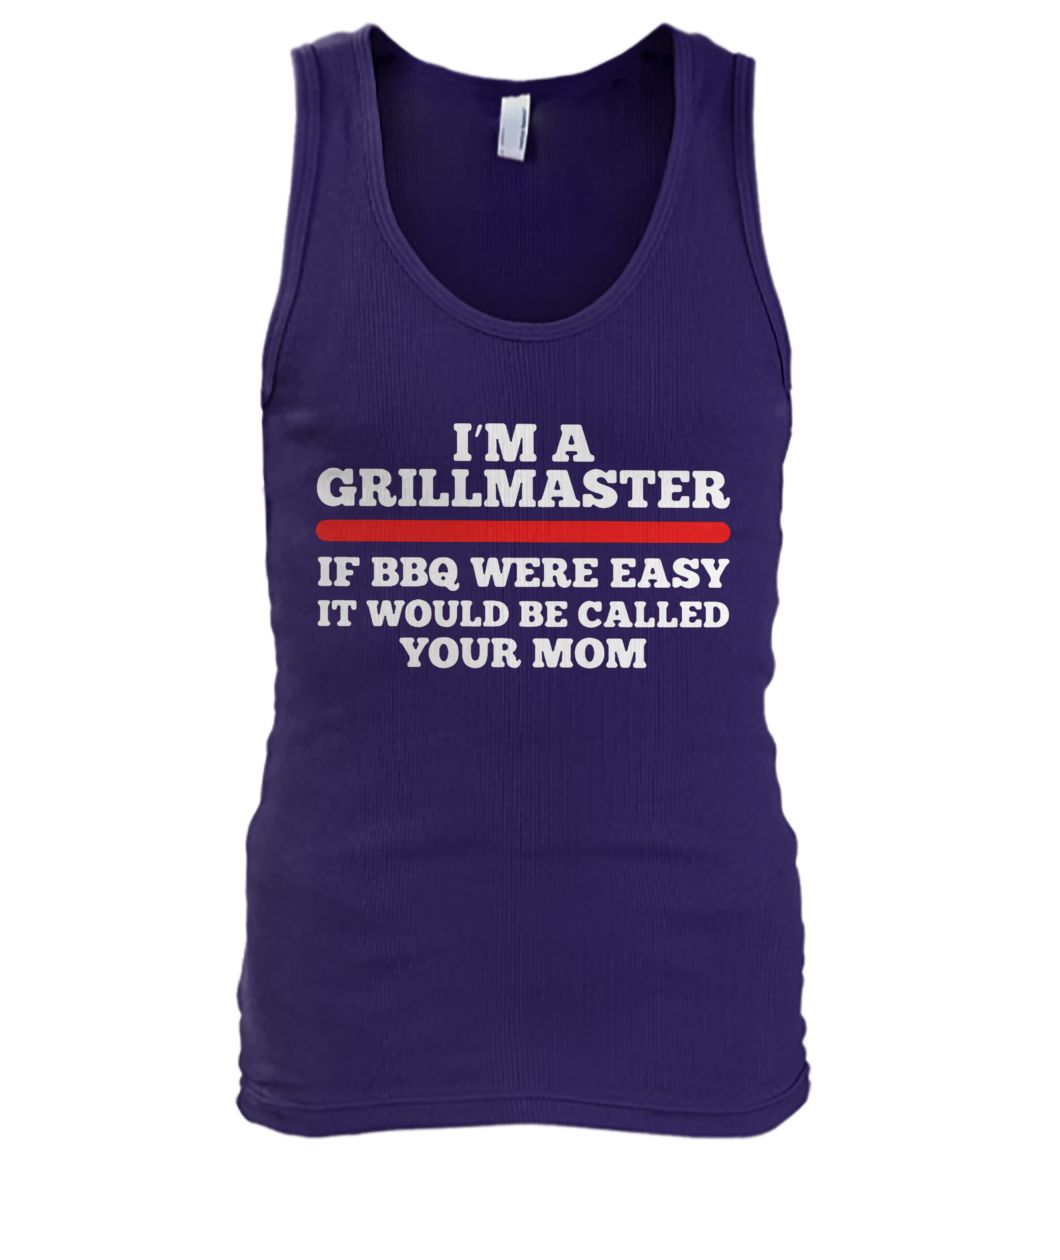 I'm a grillmaster if bbq were easy if would be called your mom men's tank top